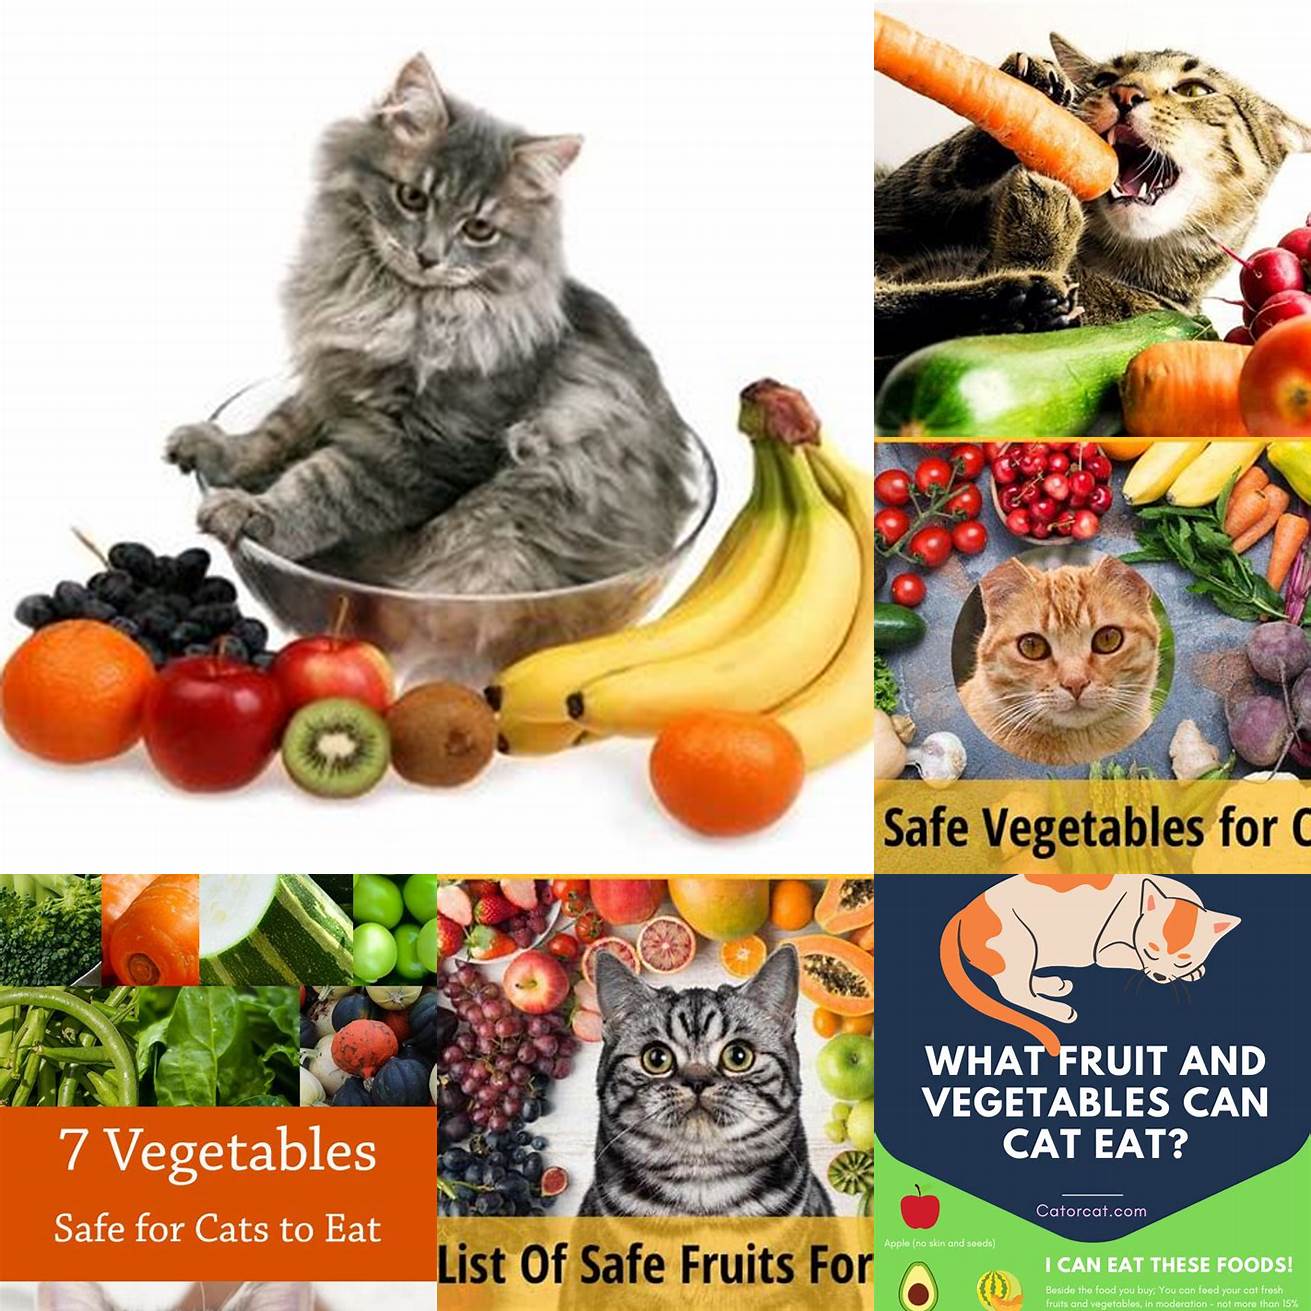 7 What are some other fruits and vegetables that are safe for cats